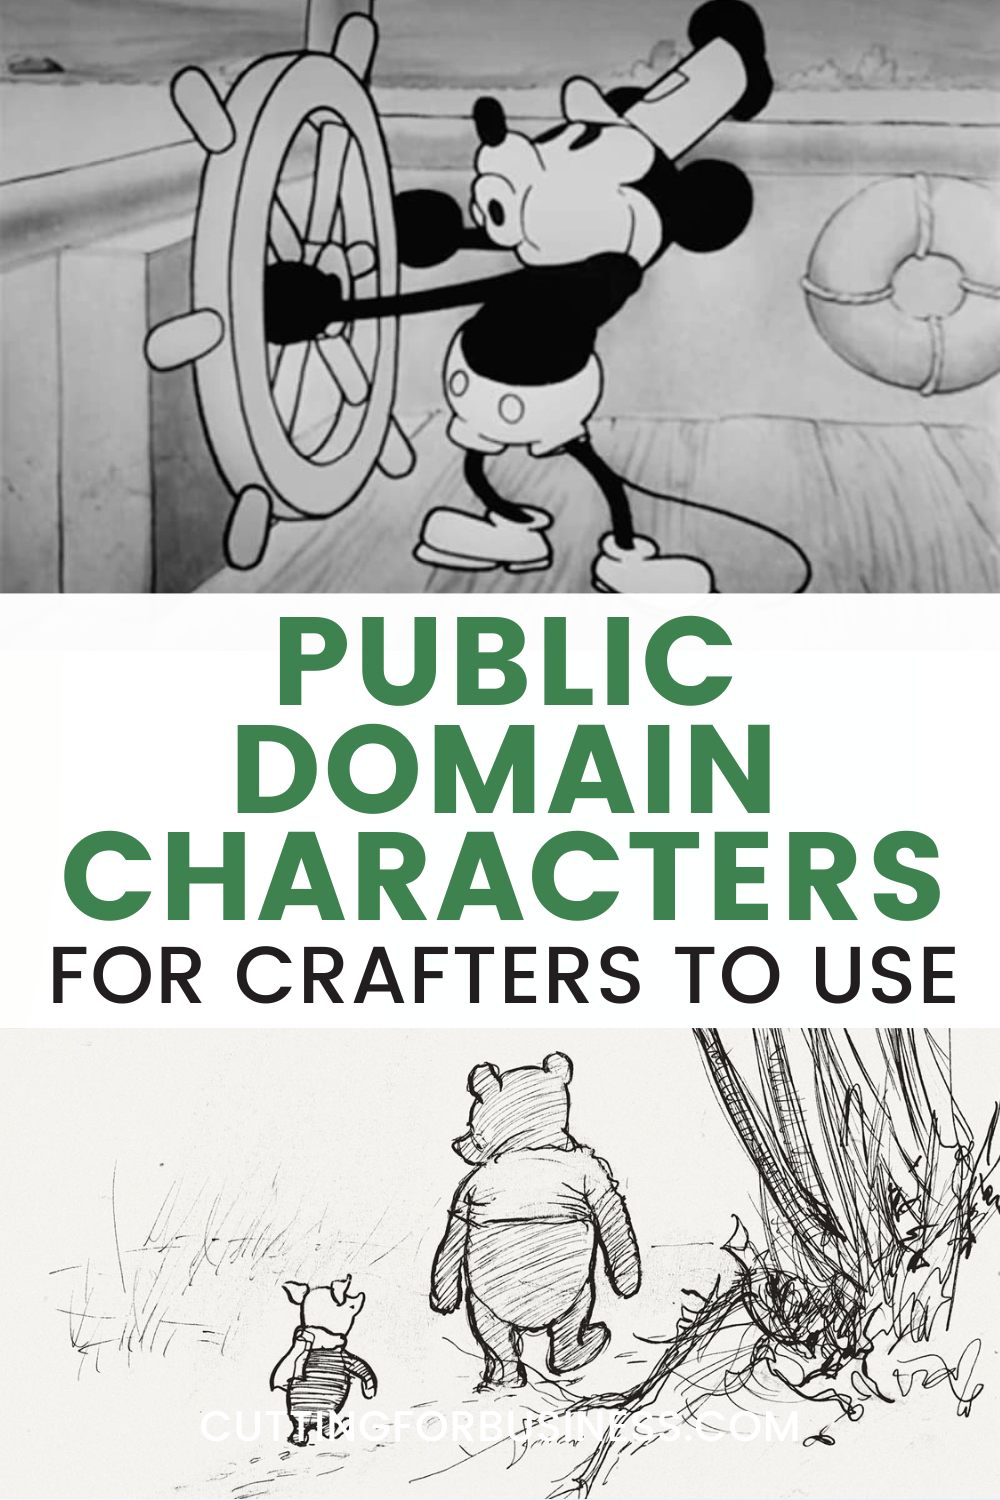 Public Domain Characters that Crafters Can Use - cuttingforbusiness.com